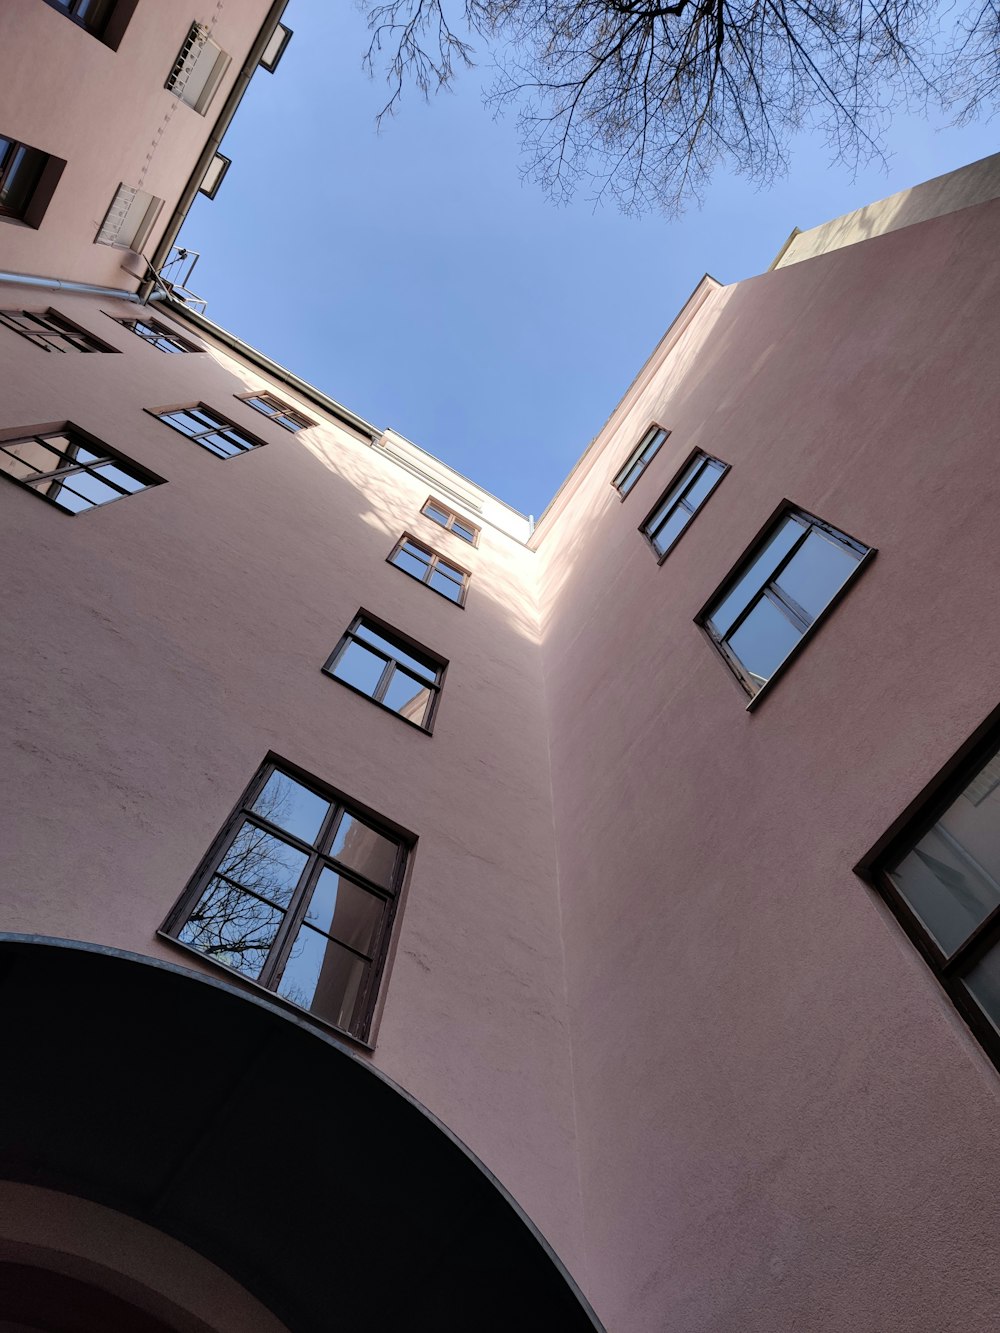 looking up at a tall building with many windows